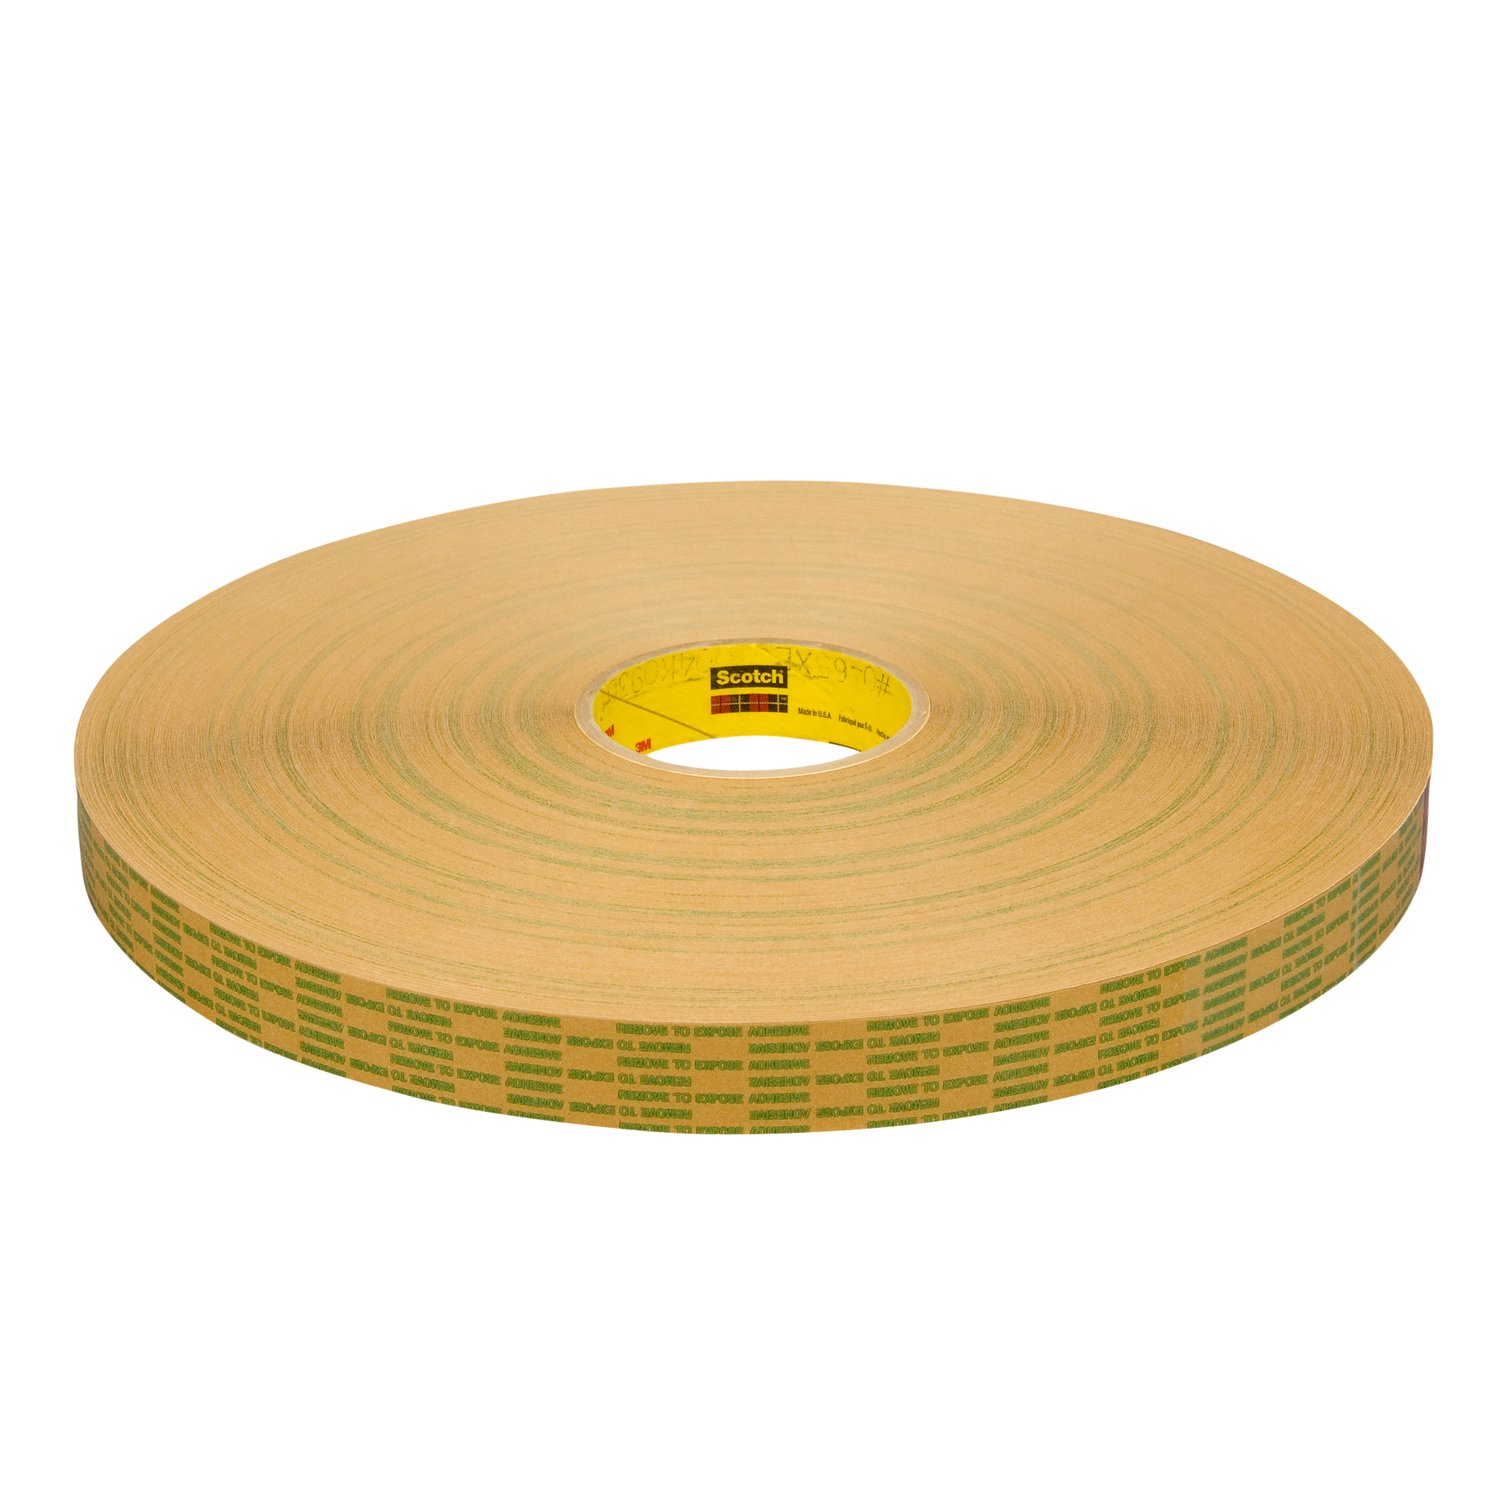 7010372430 - 3M Adhesive Transfer Tape Extended Liner 465XL, Translucent, 1/2 in x
600 yd, 2 mil, 18 per case